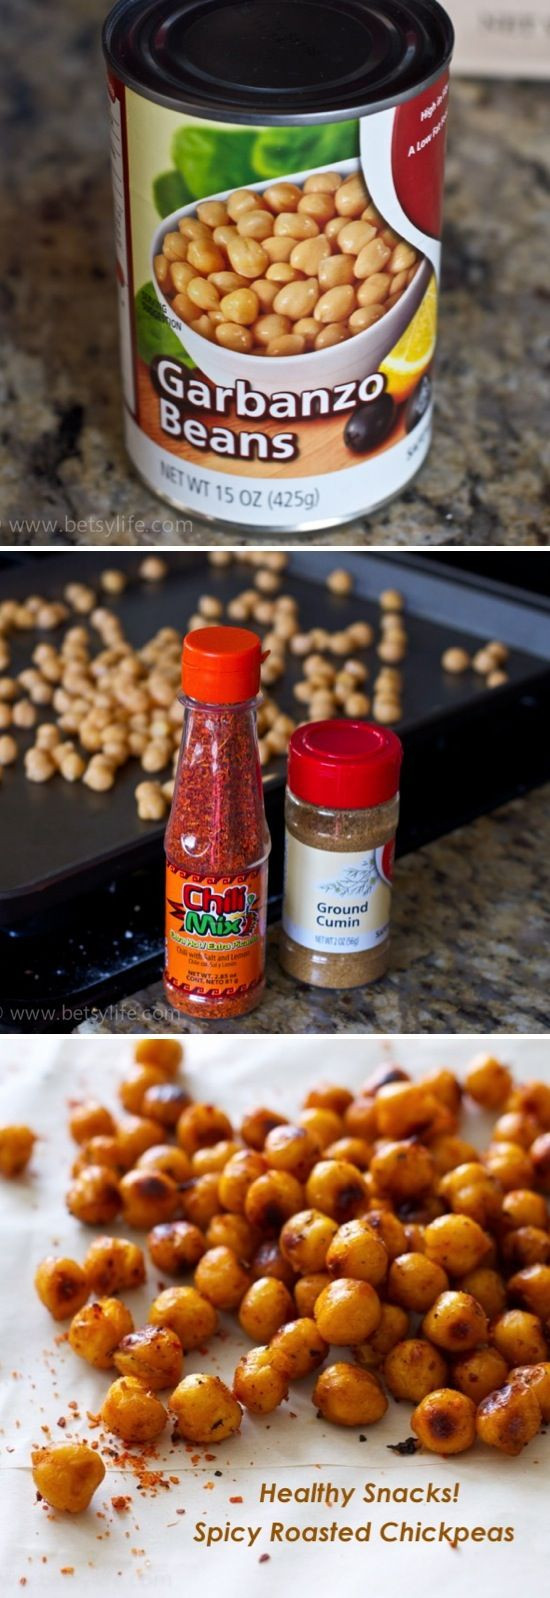 Healthy Spicy Snacks
 17 Best images about Adjectifs on Pinterest